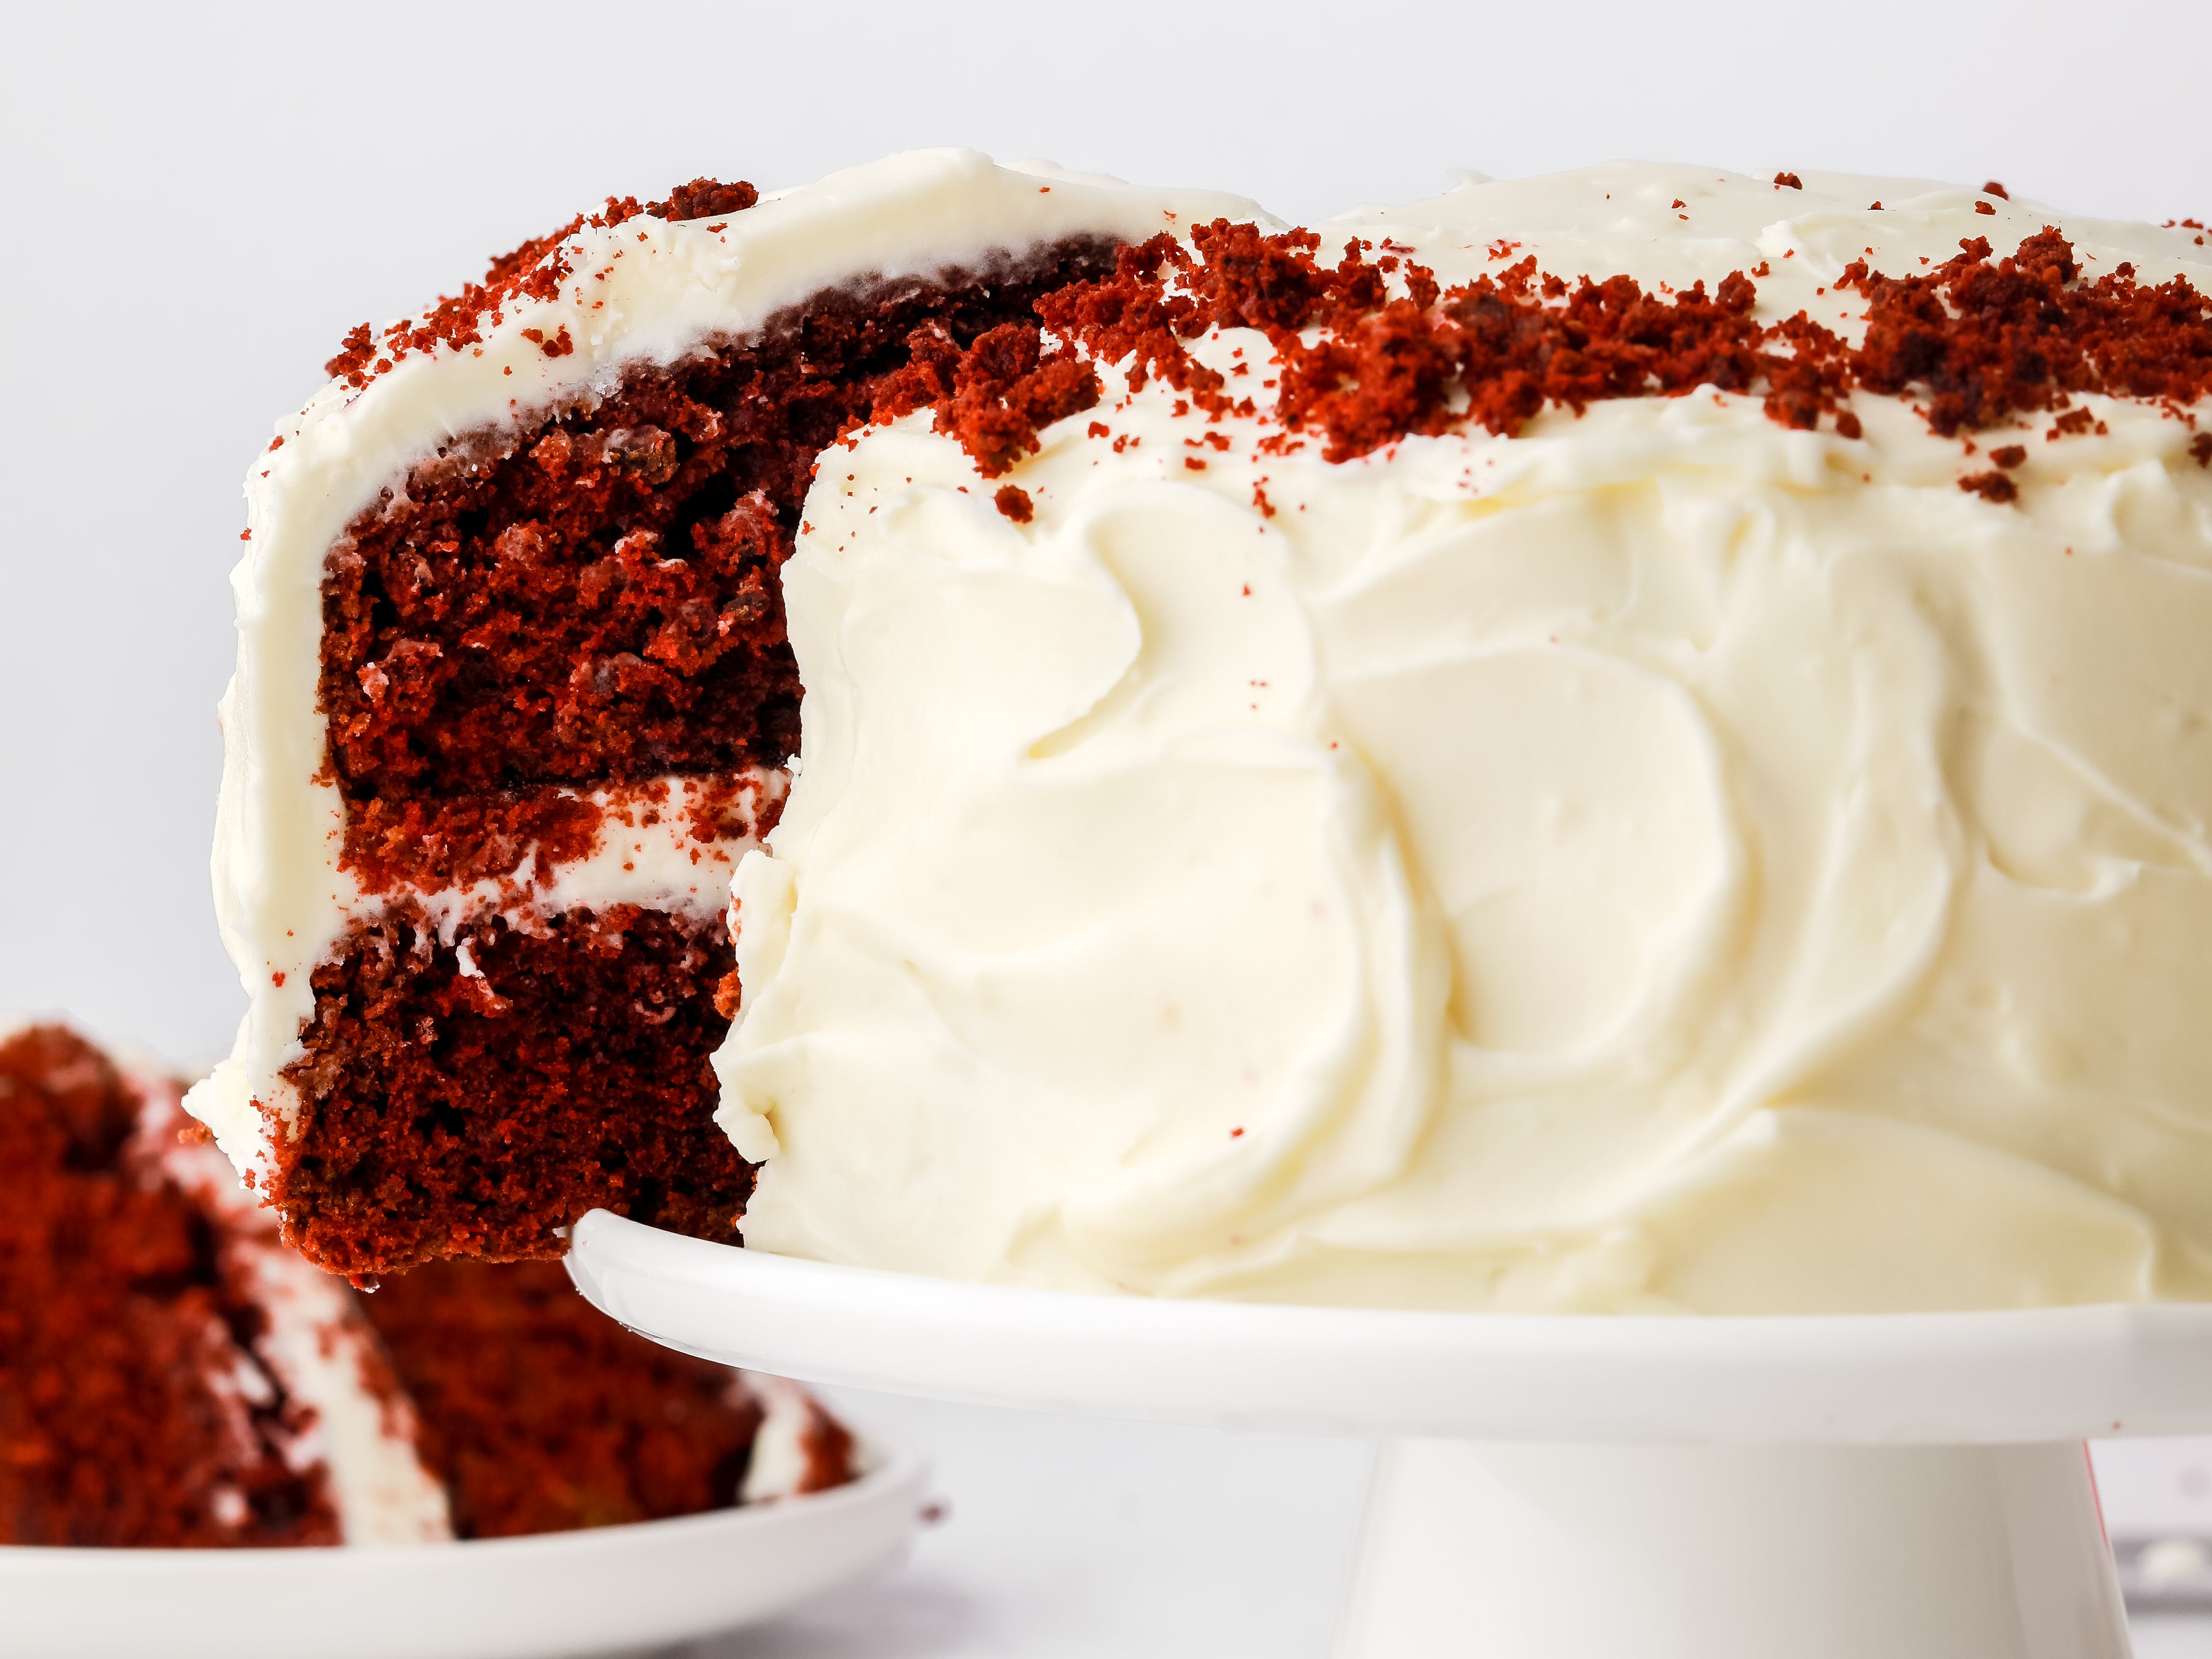 Close up of a cut red velvet cake